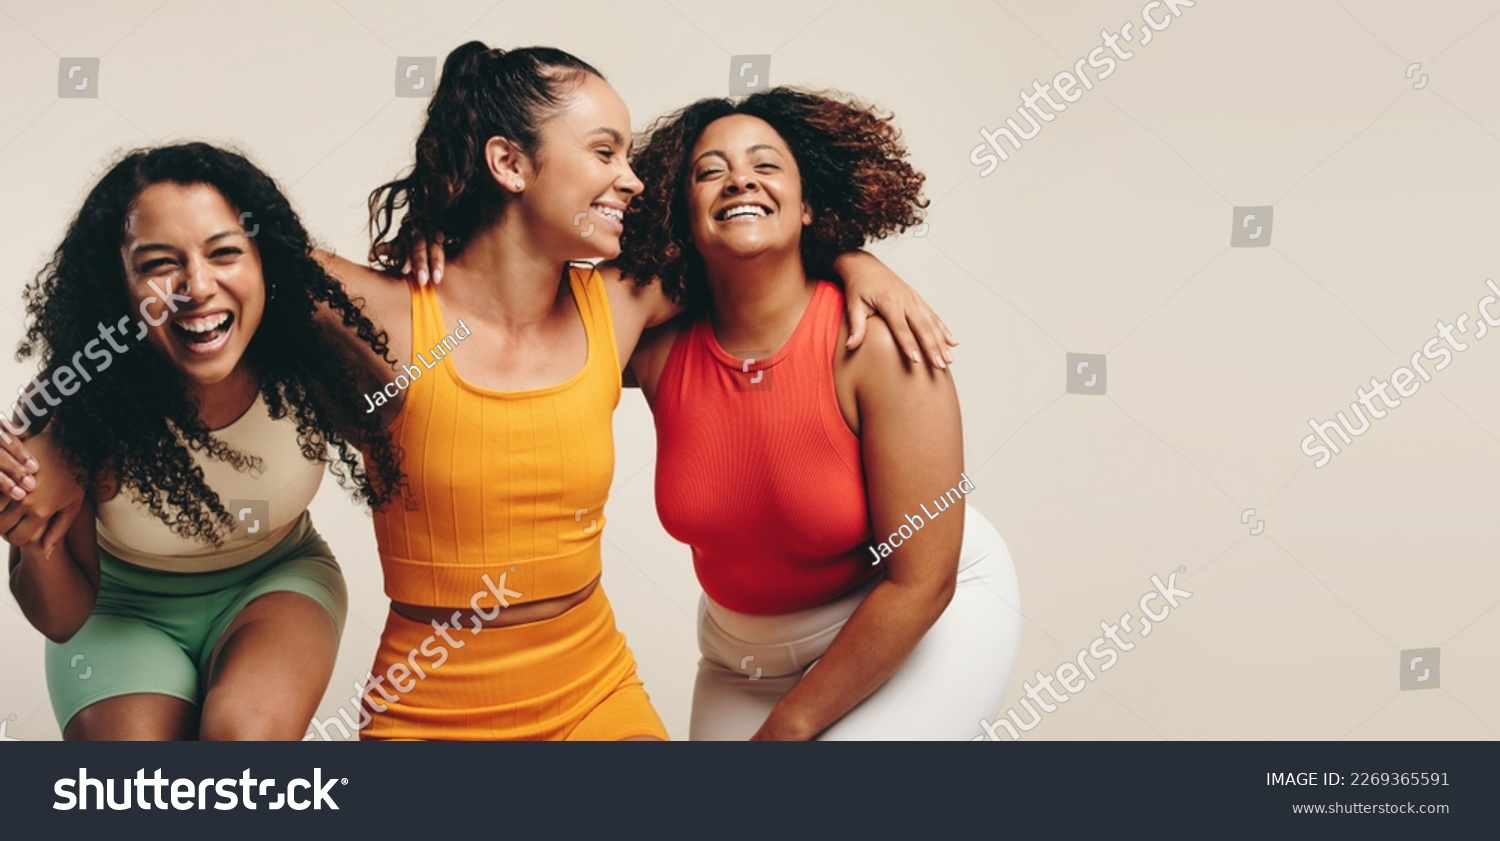 Group of three young, diverse female athletes celebrate their healthy and active lifestyle in a sports studio, smiling and laughing together while wearing sporty fitness clothes. #2269365591